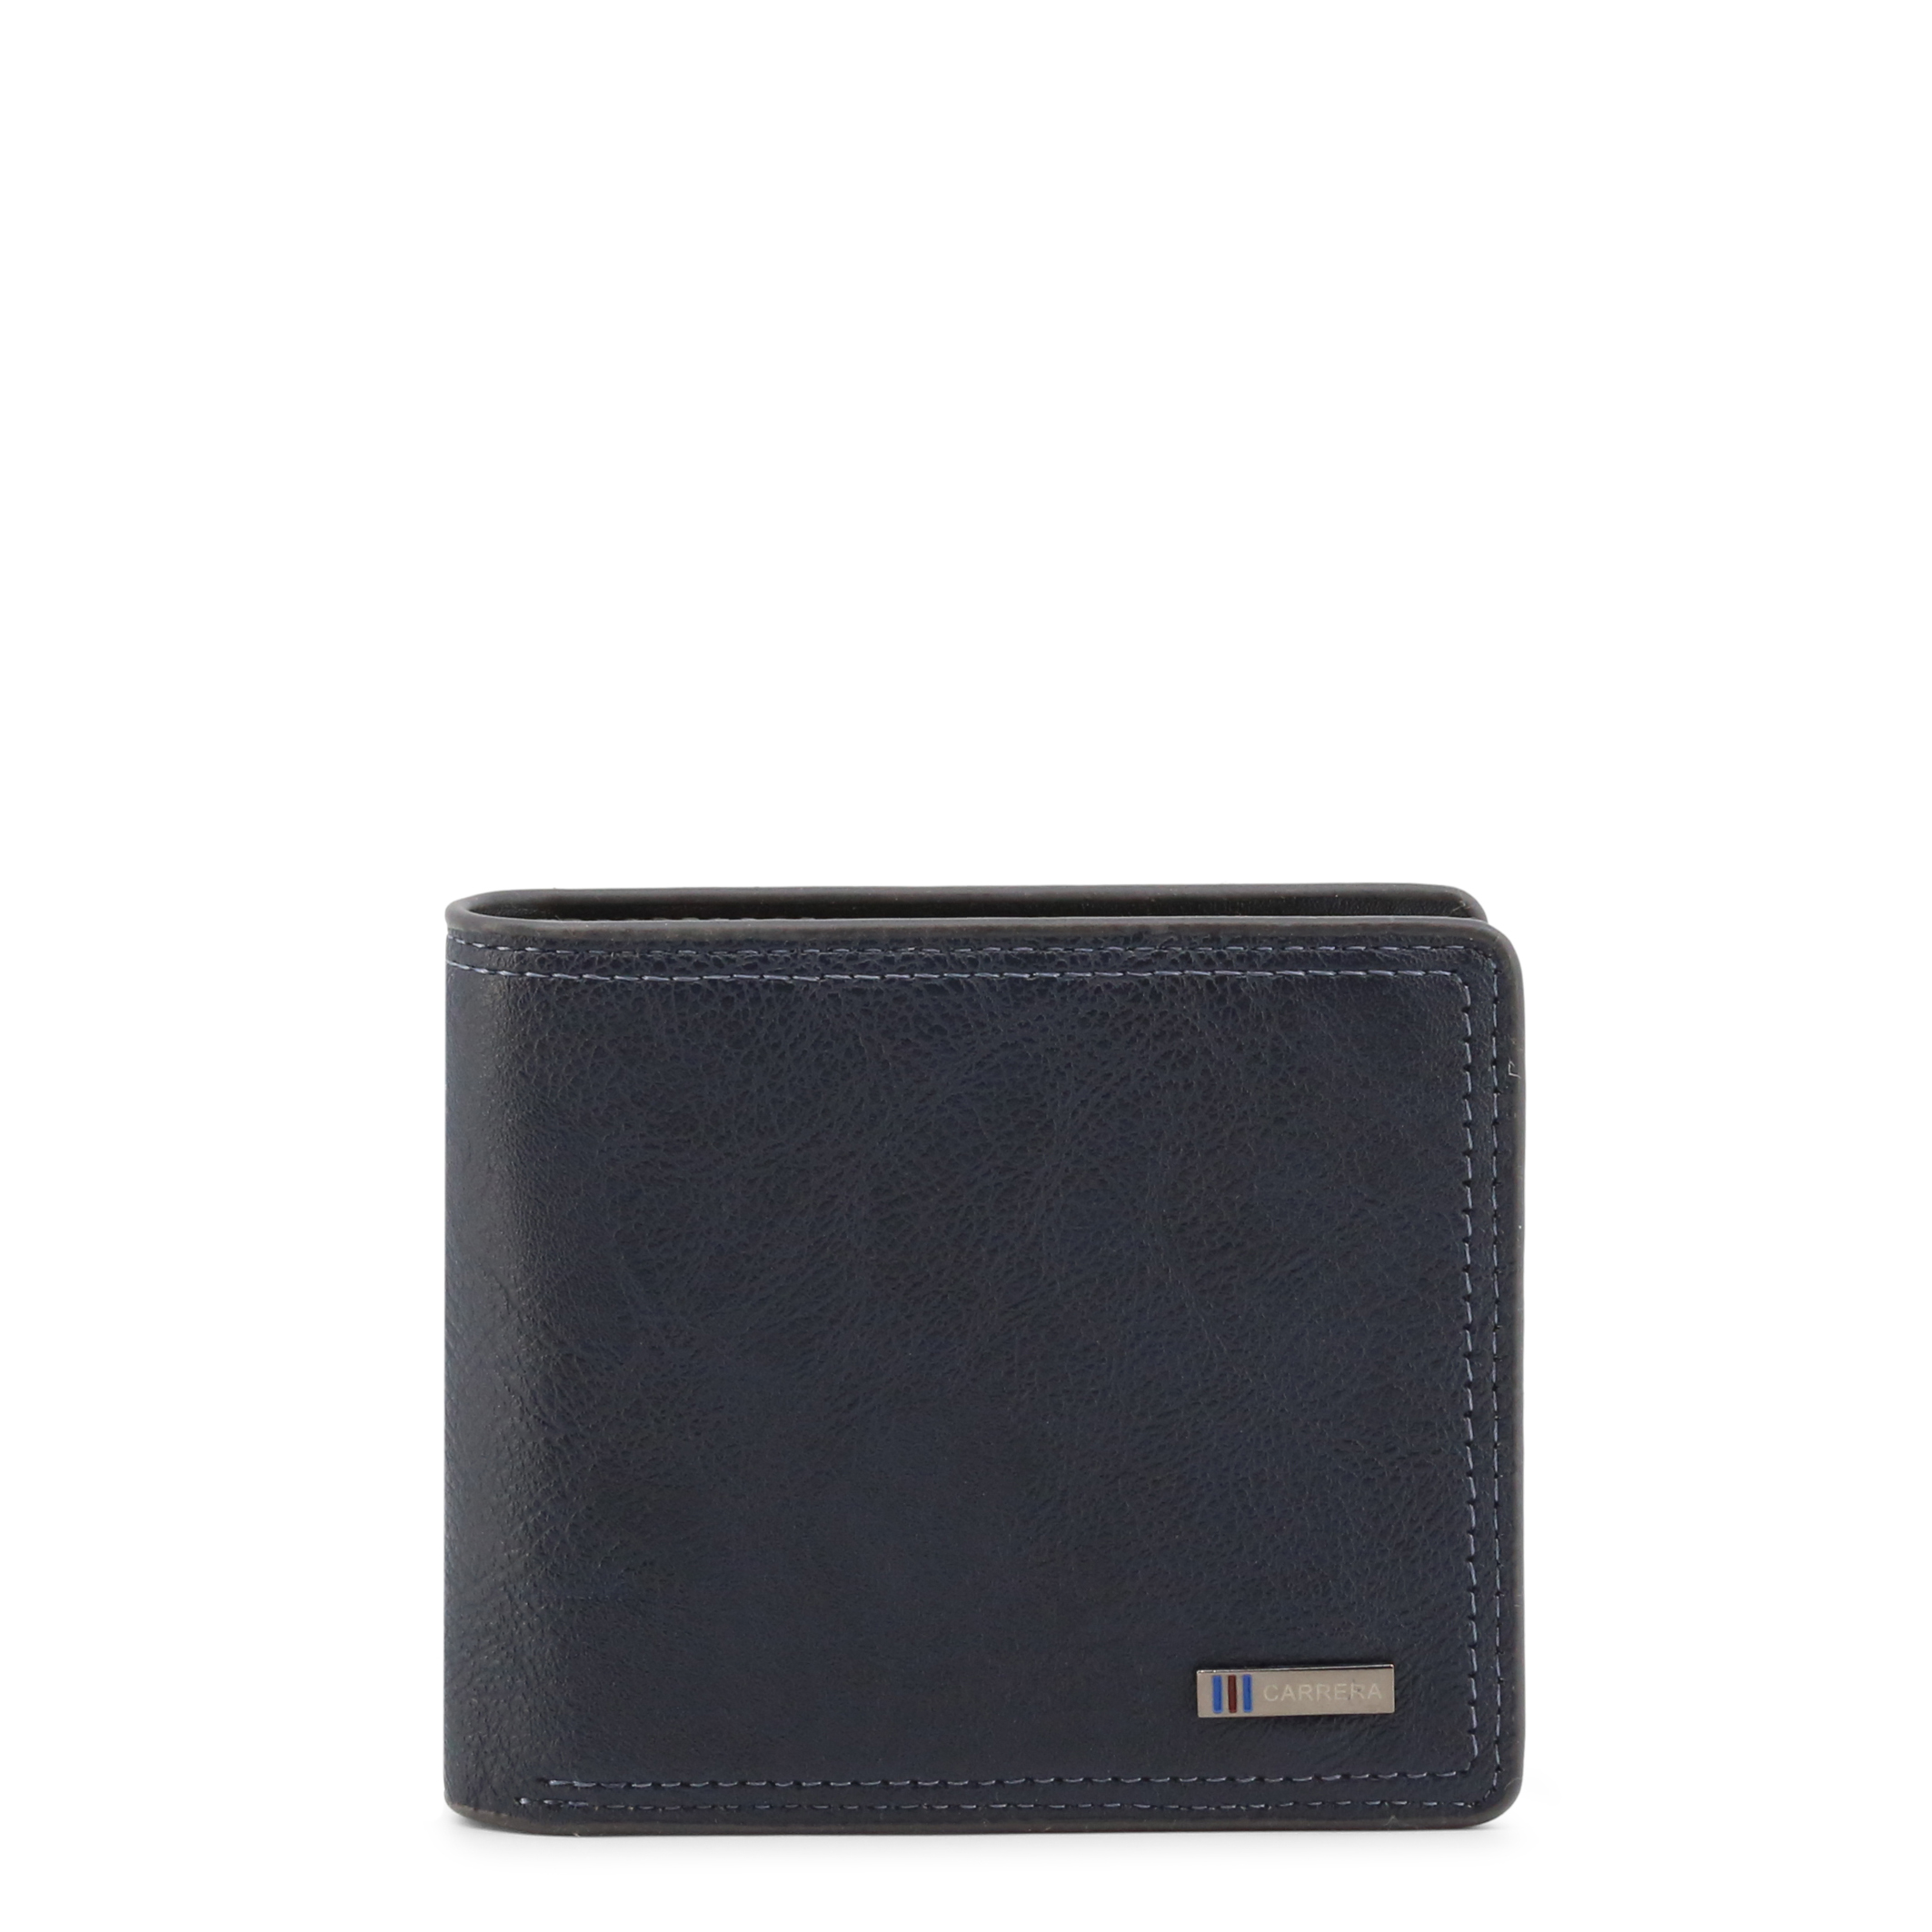 Carrera Jeans Blue Wallets for Men - HOLD_CB6517